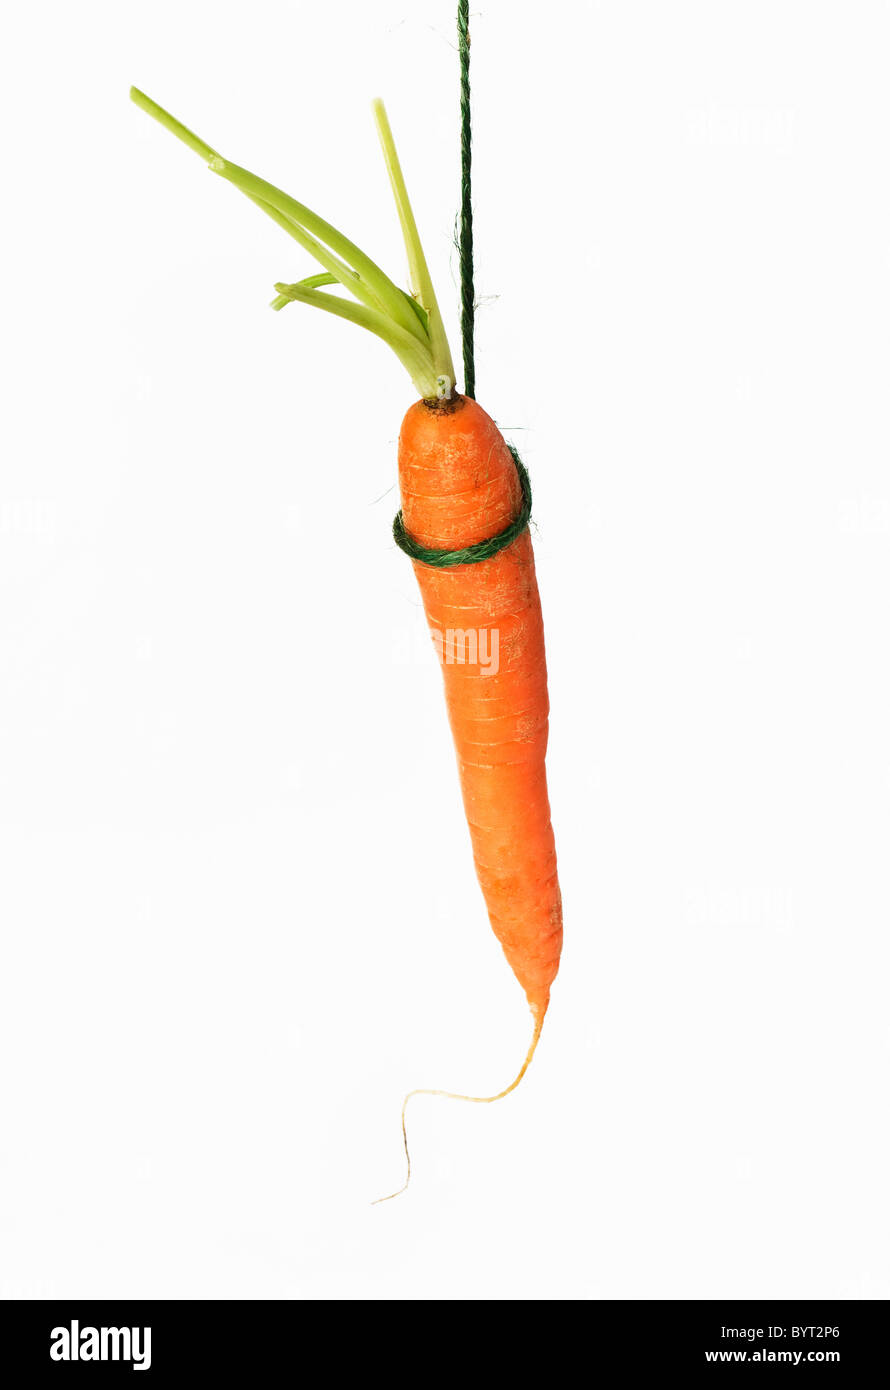 One Carrot on string Stock Photo